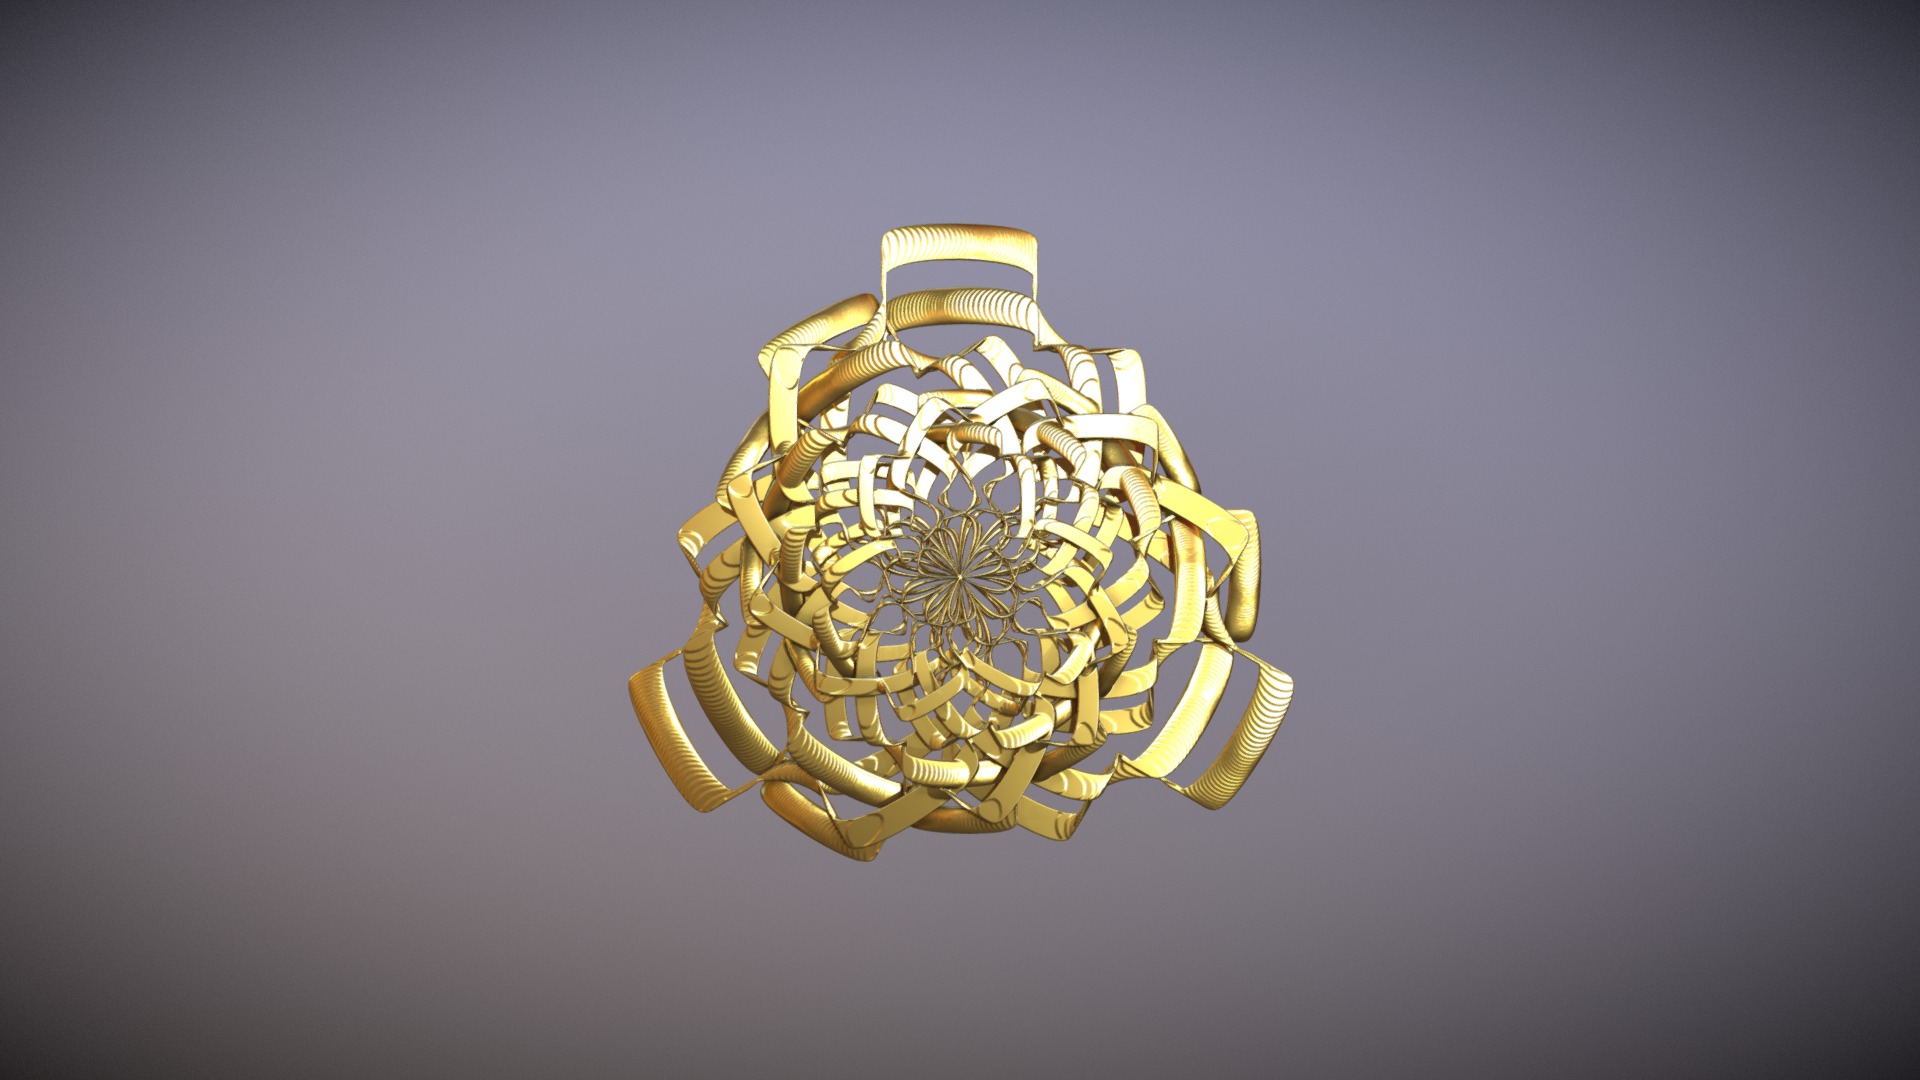 3D model India - This is a 3D model of the India. The 3D model is about a gold and silver diamond.